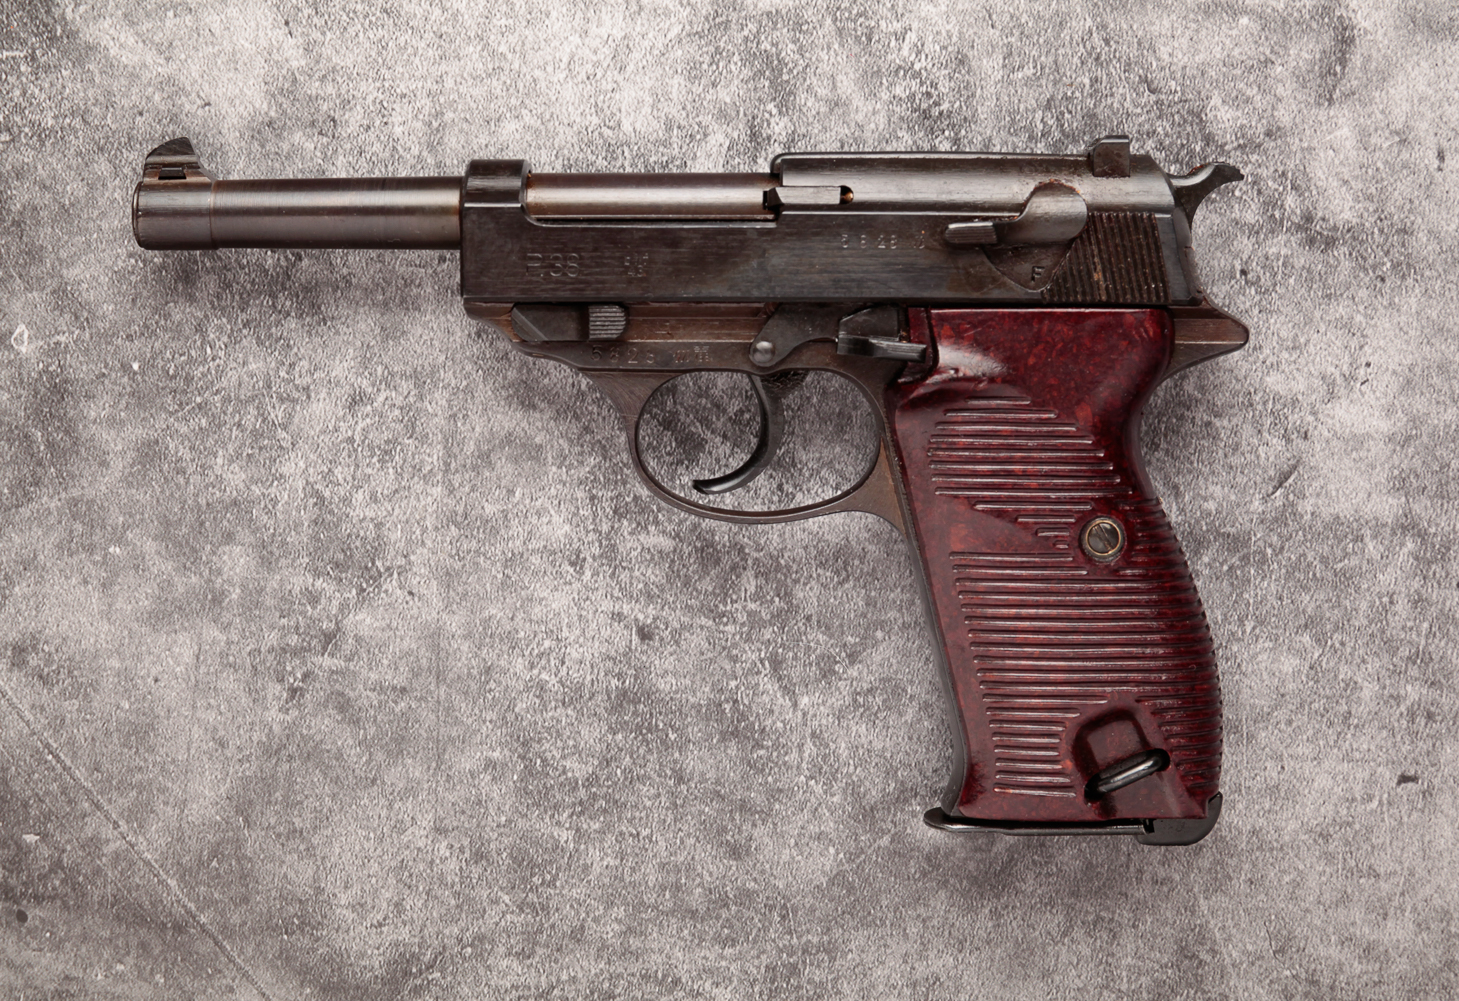 WALTHER P.38 9MM SEMI AUTOMATIC PISTOL